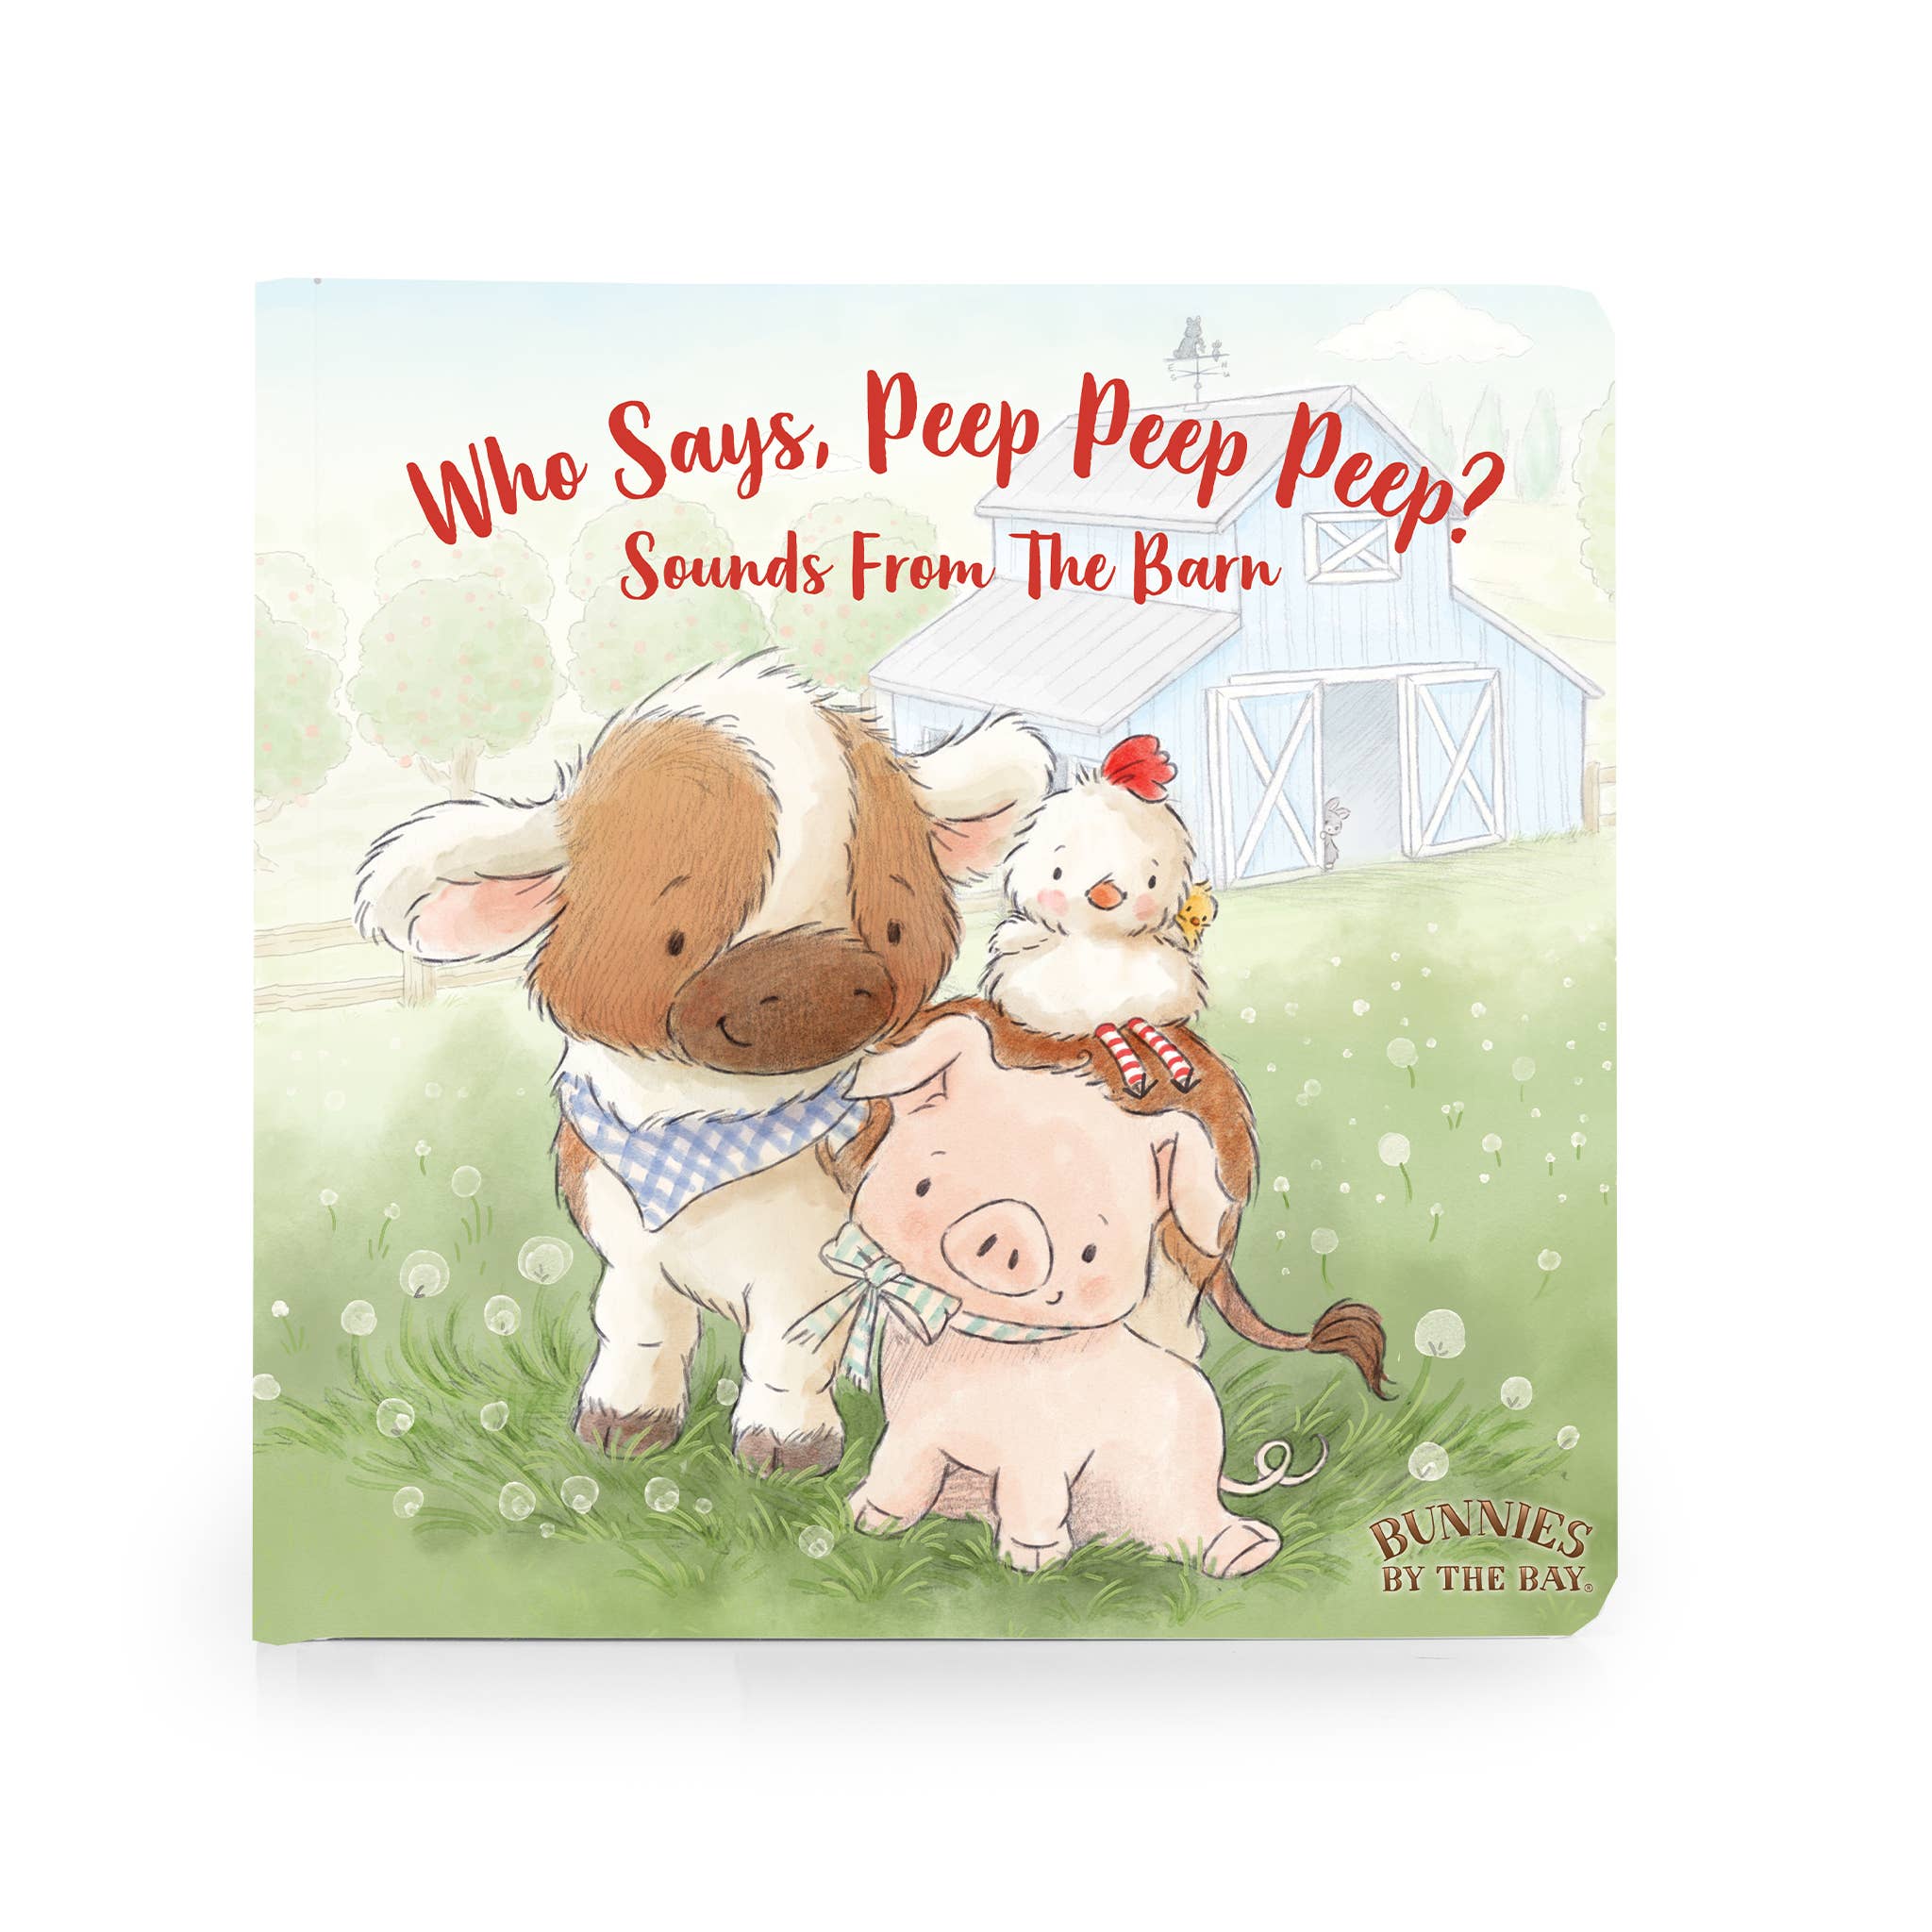 Children's board book with the title "Who Says, Peep Peep Peep? Sounds From the Barn"